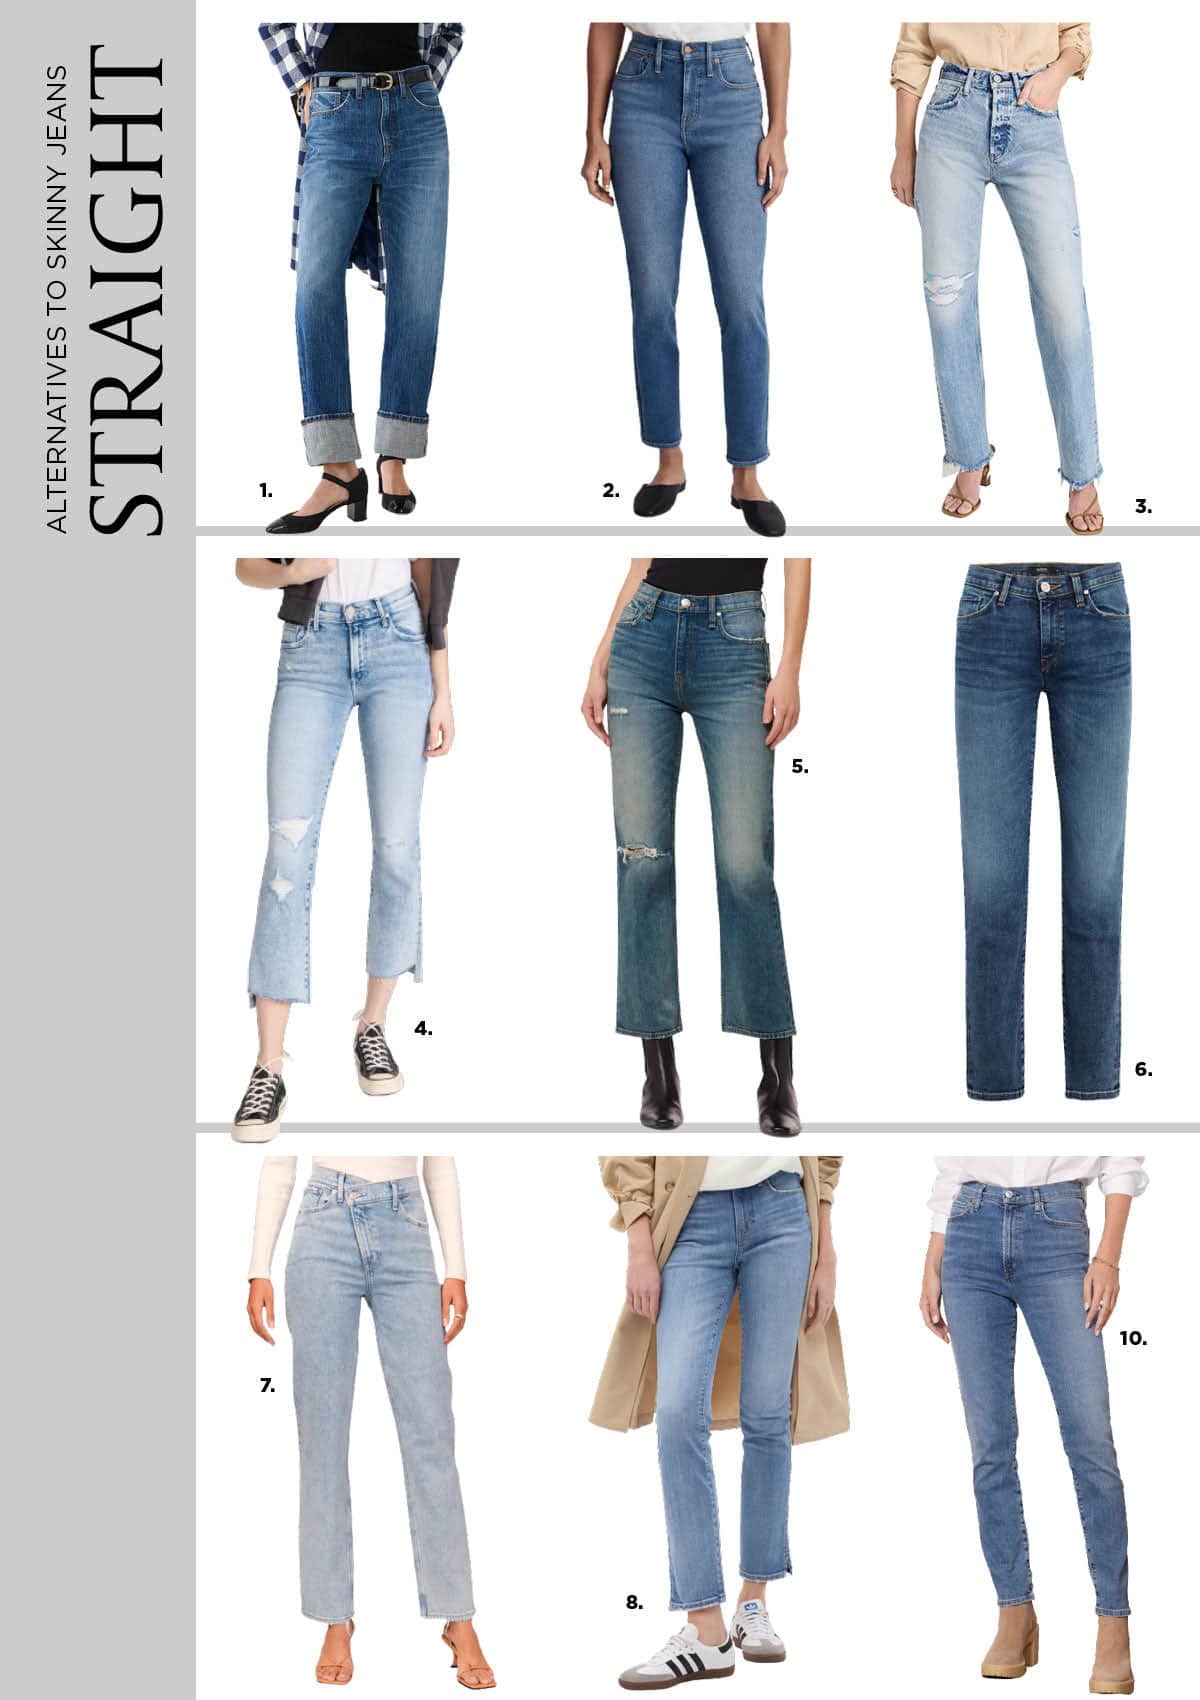 Skinny jeans alternatives. Skinny jeans are our but you still want a slim cut denim? Try the trending straight fit jeans. 